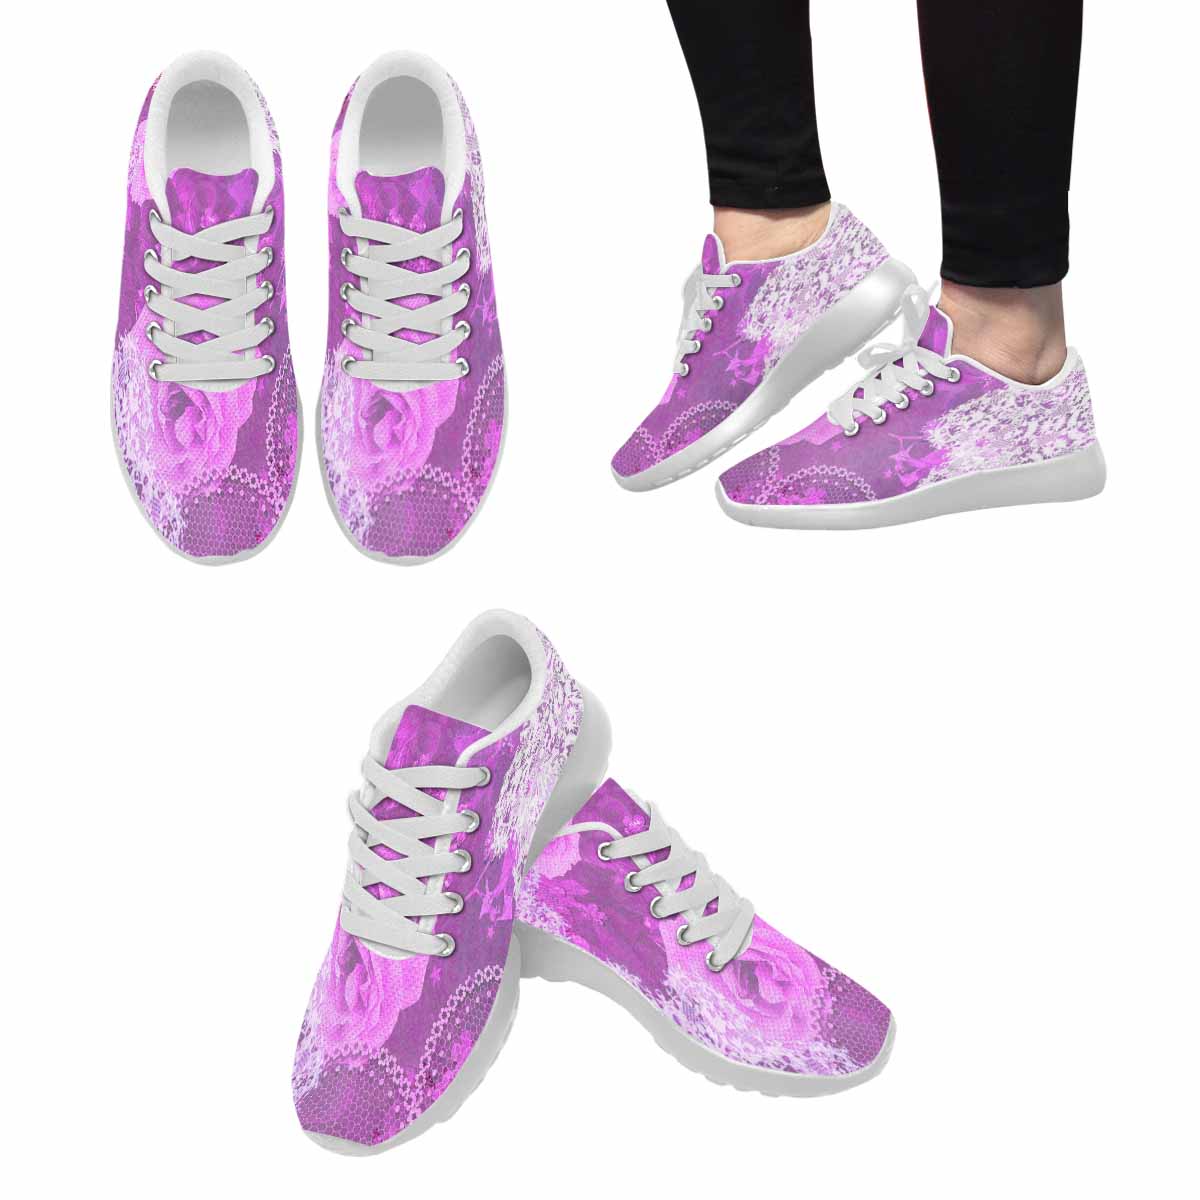 Victorian lace print, womens cute casual or running sneakers, design 03